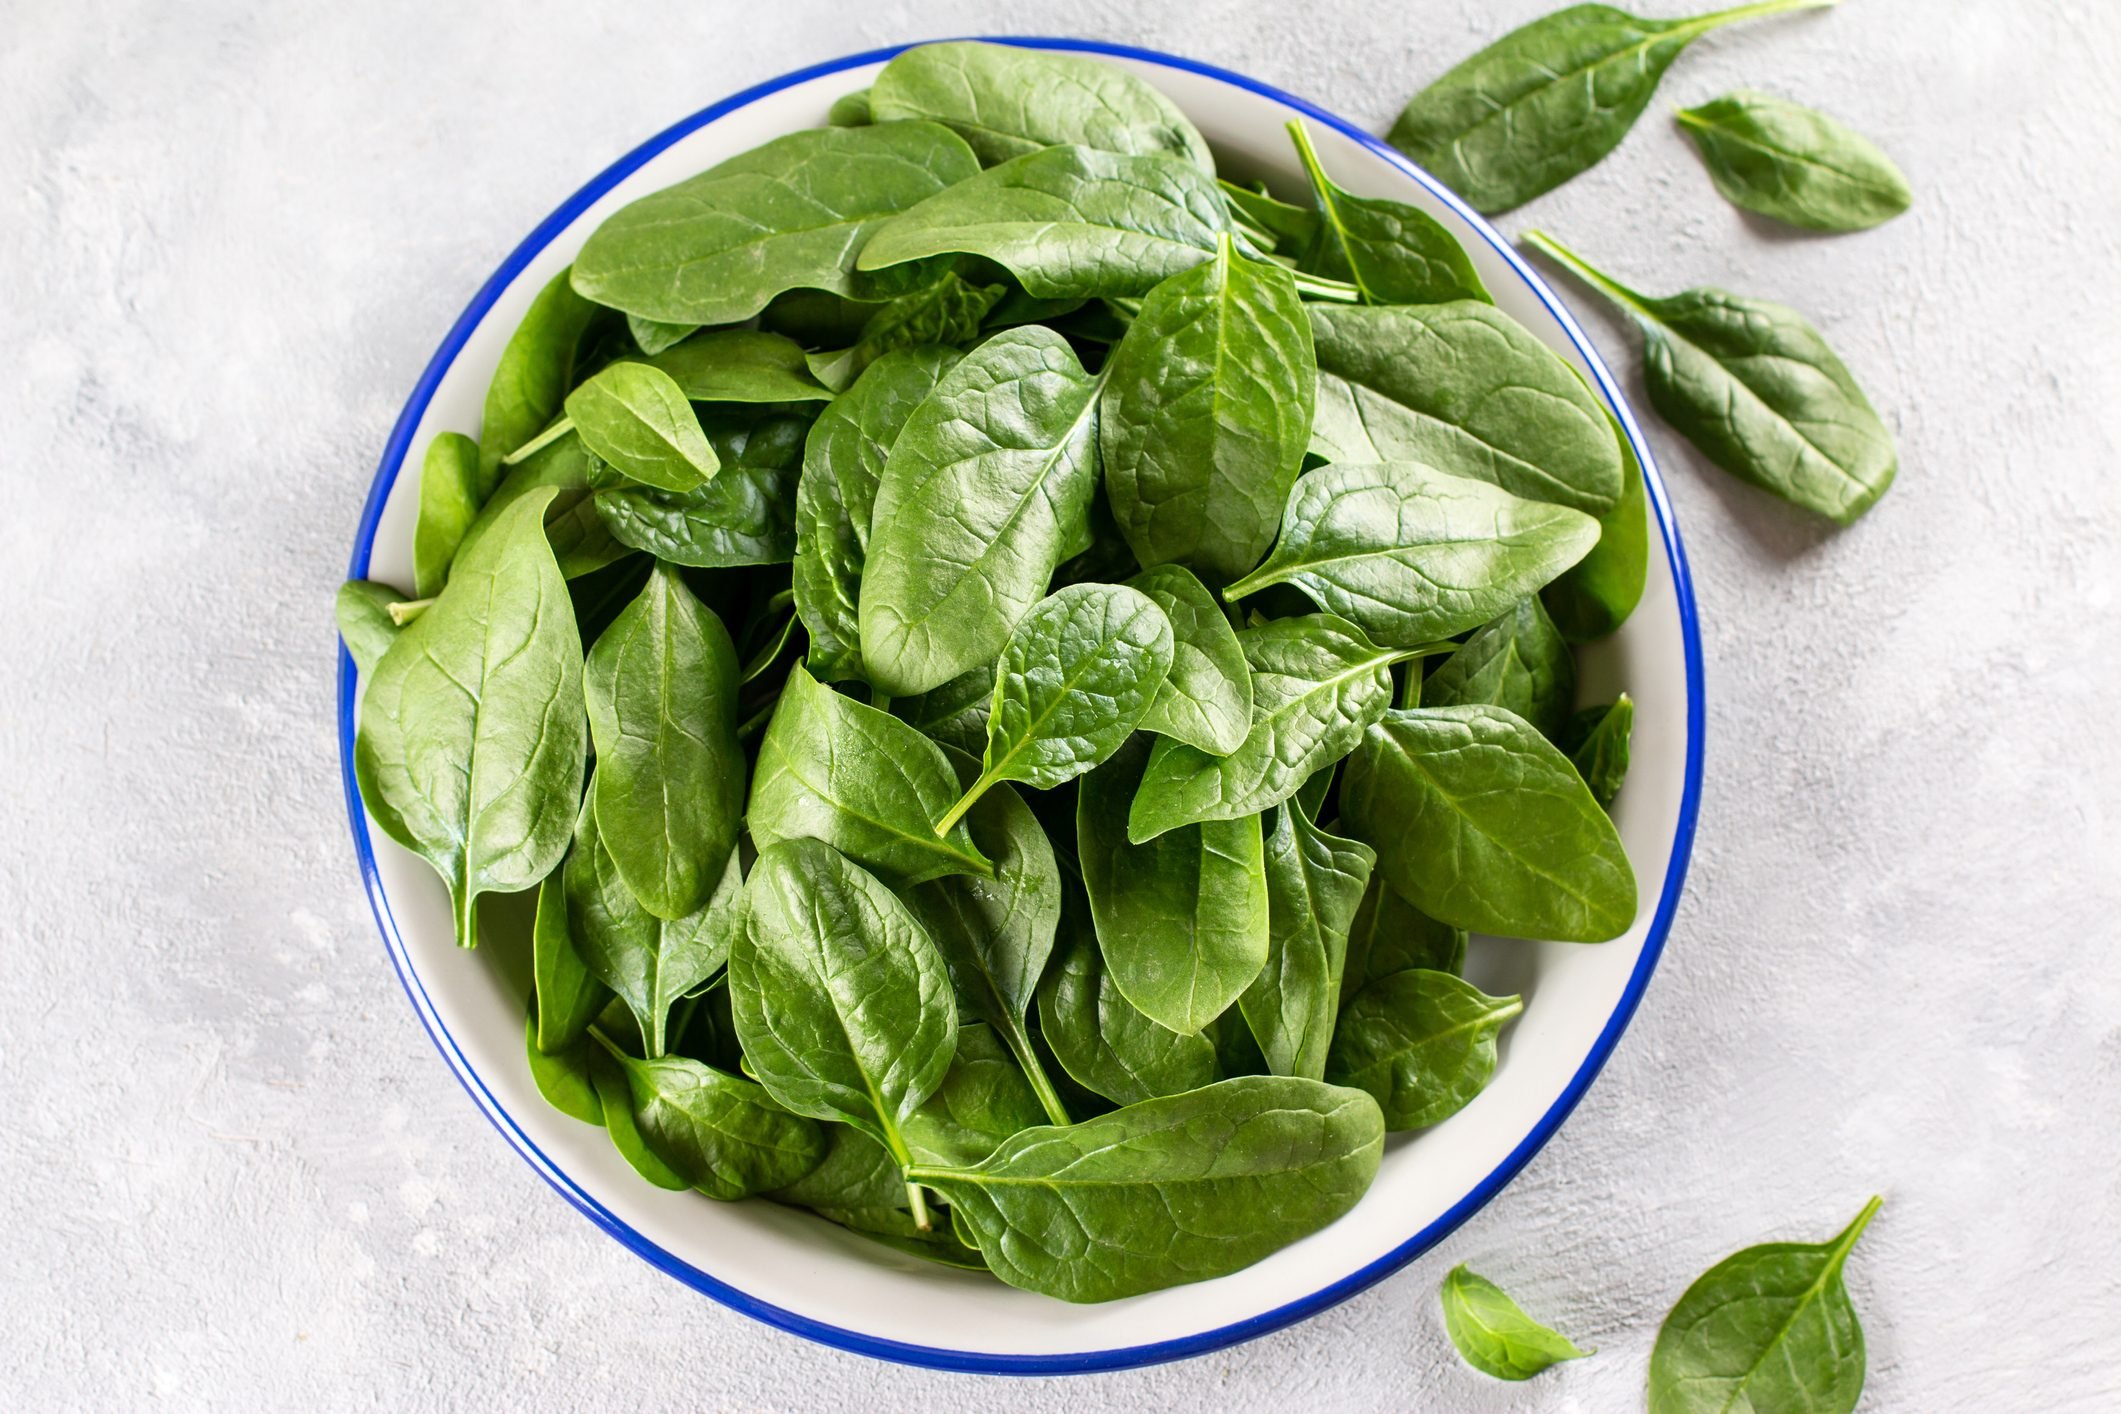 Fresh organic baby spinach leaves on a plate on a light concrete background, top view. Healthy food concept.